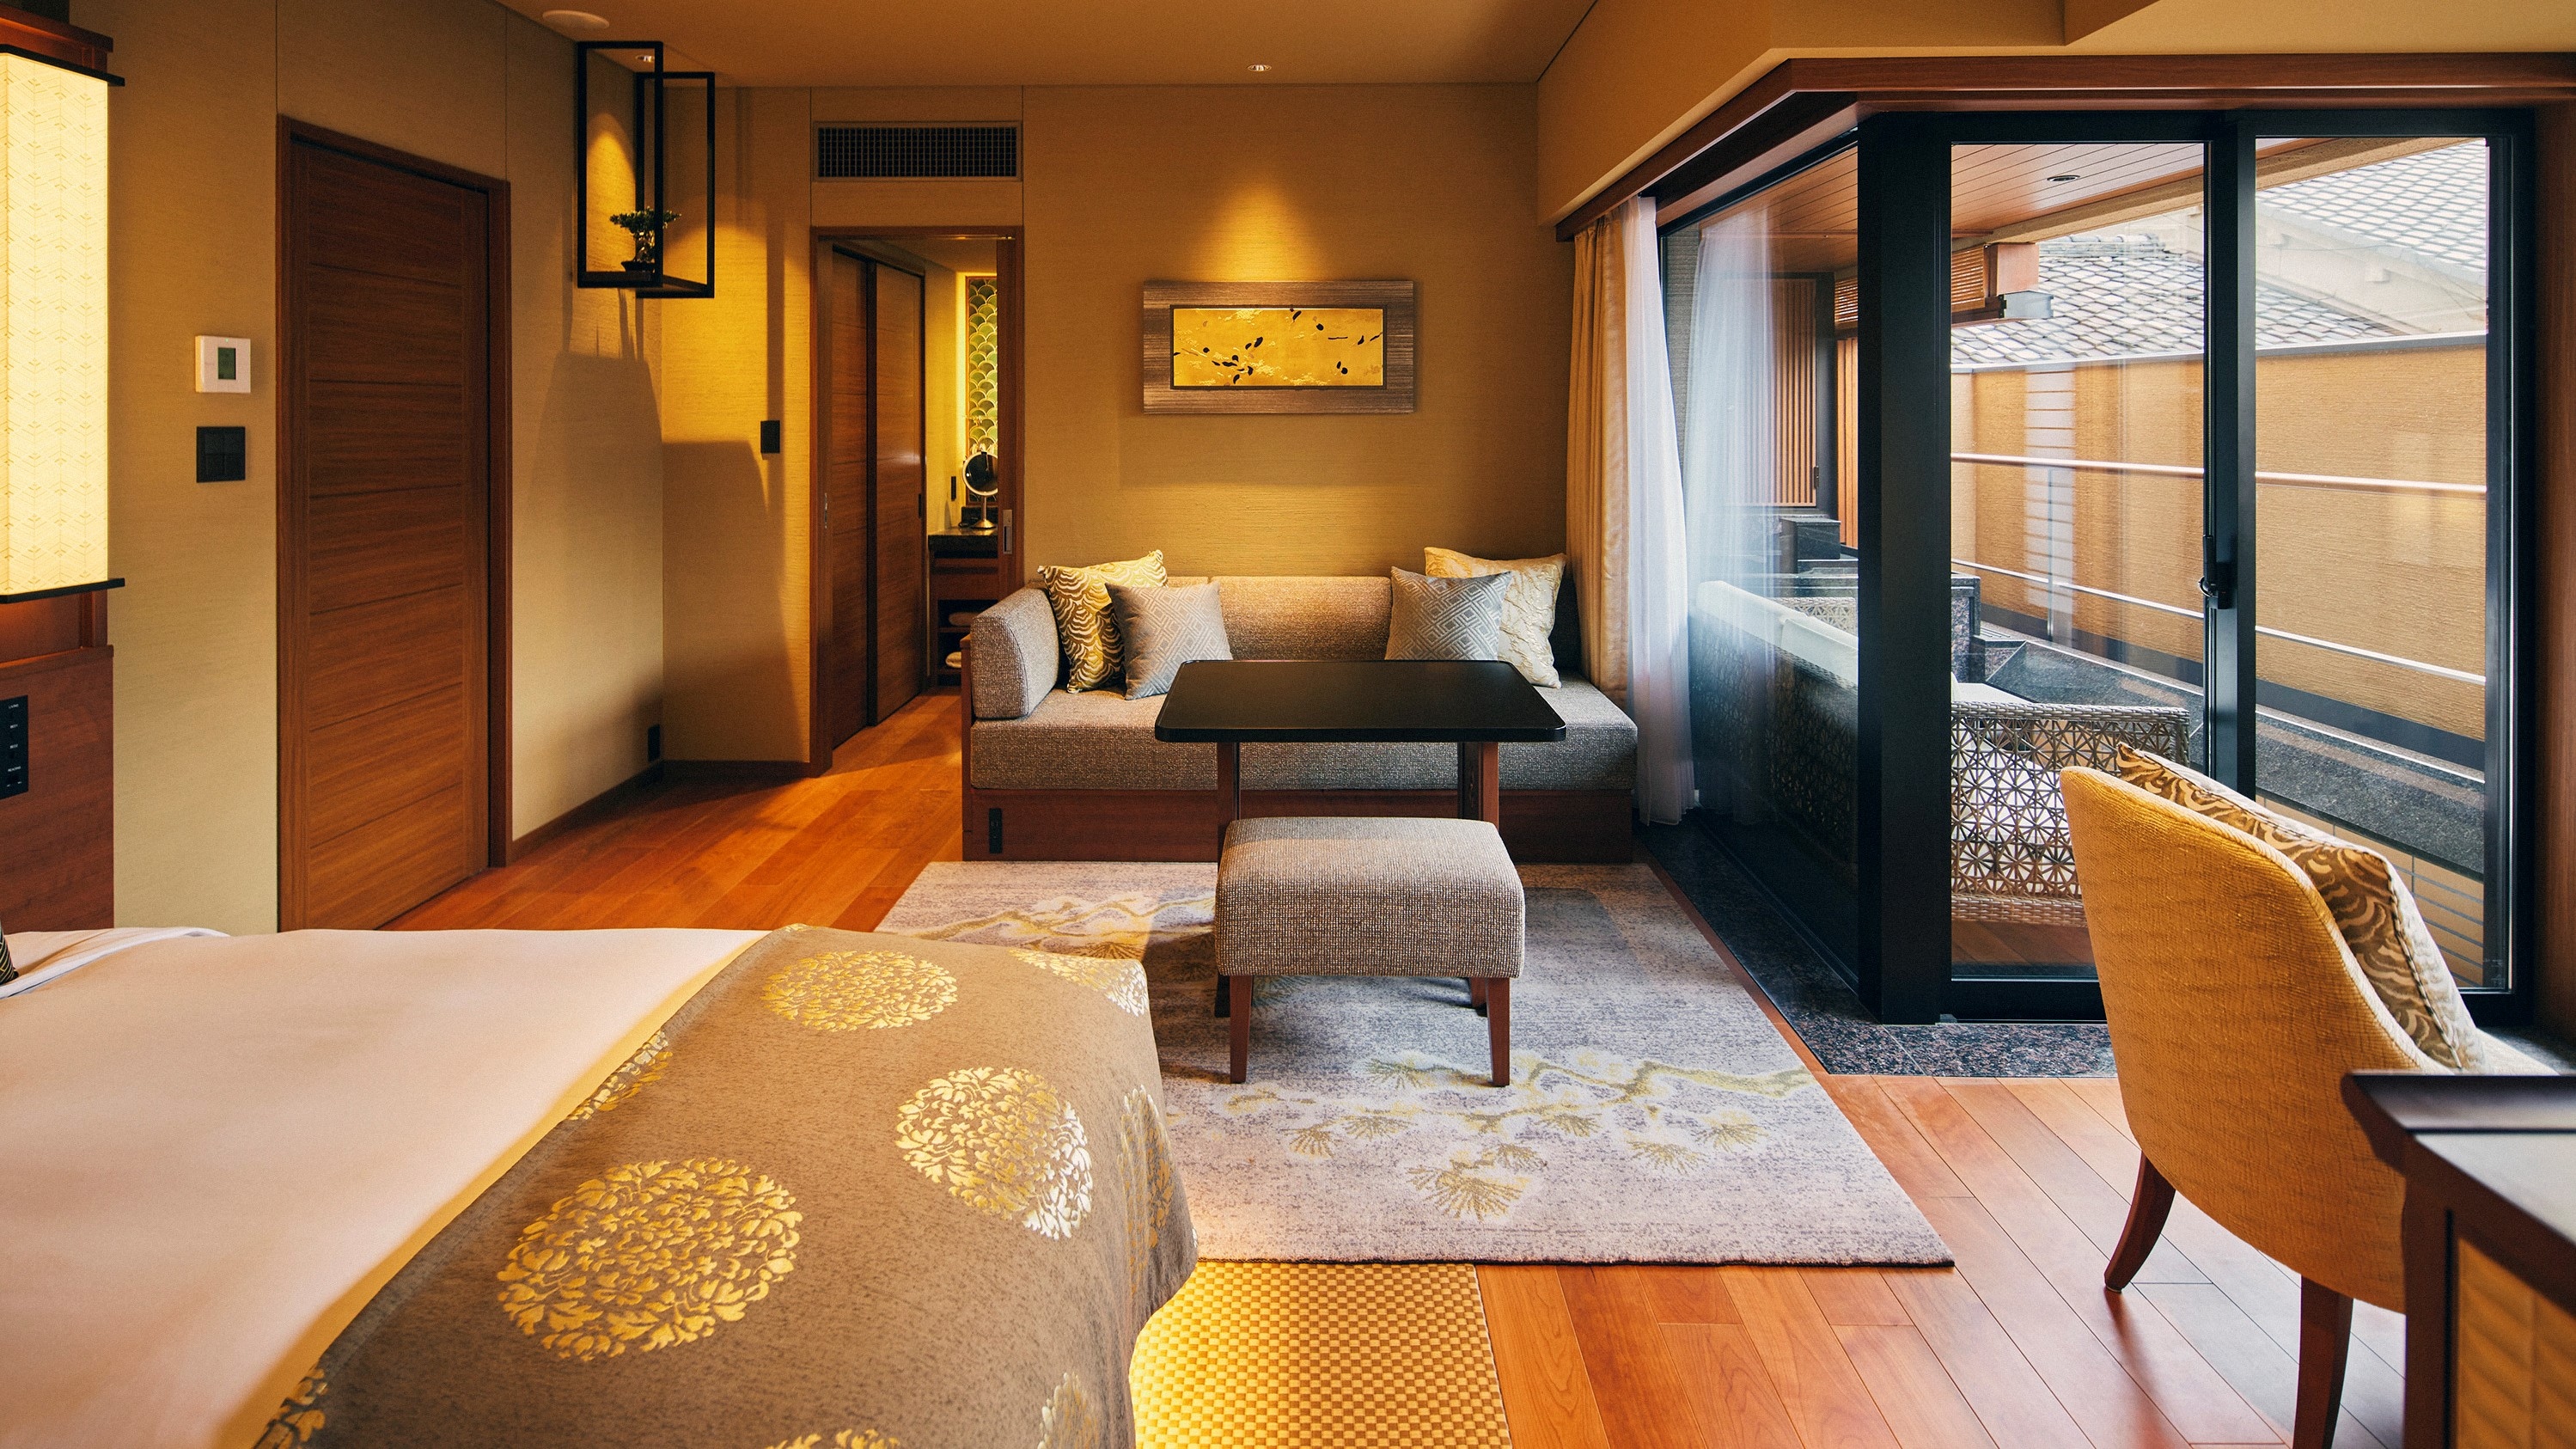 Miyabi Corner Twin: Up to 3 people can stay in this modern Japanese room.